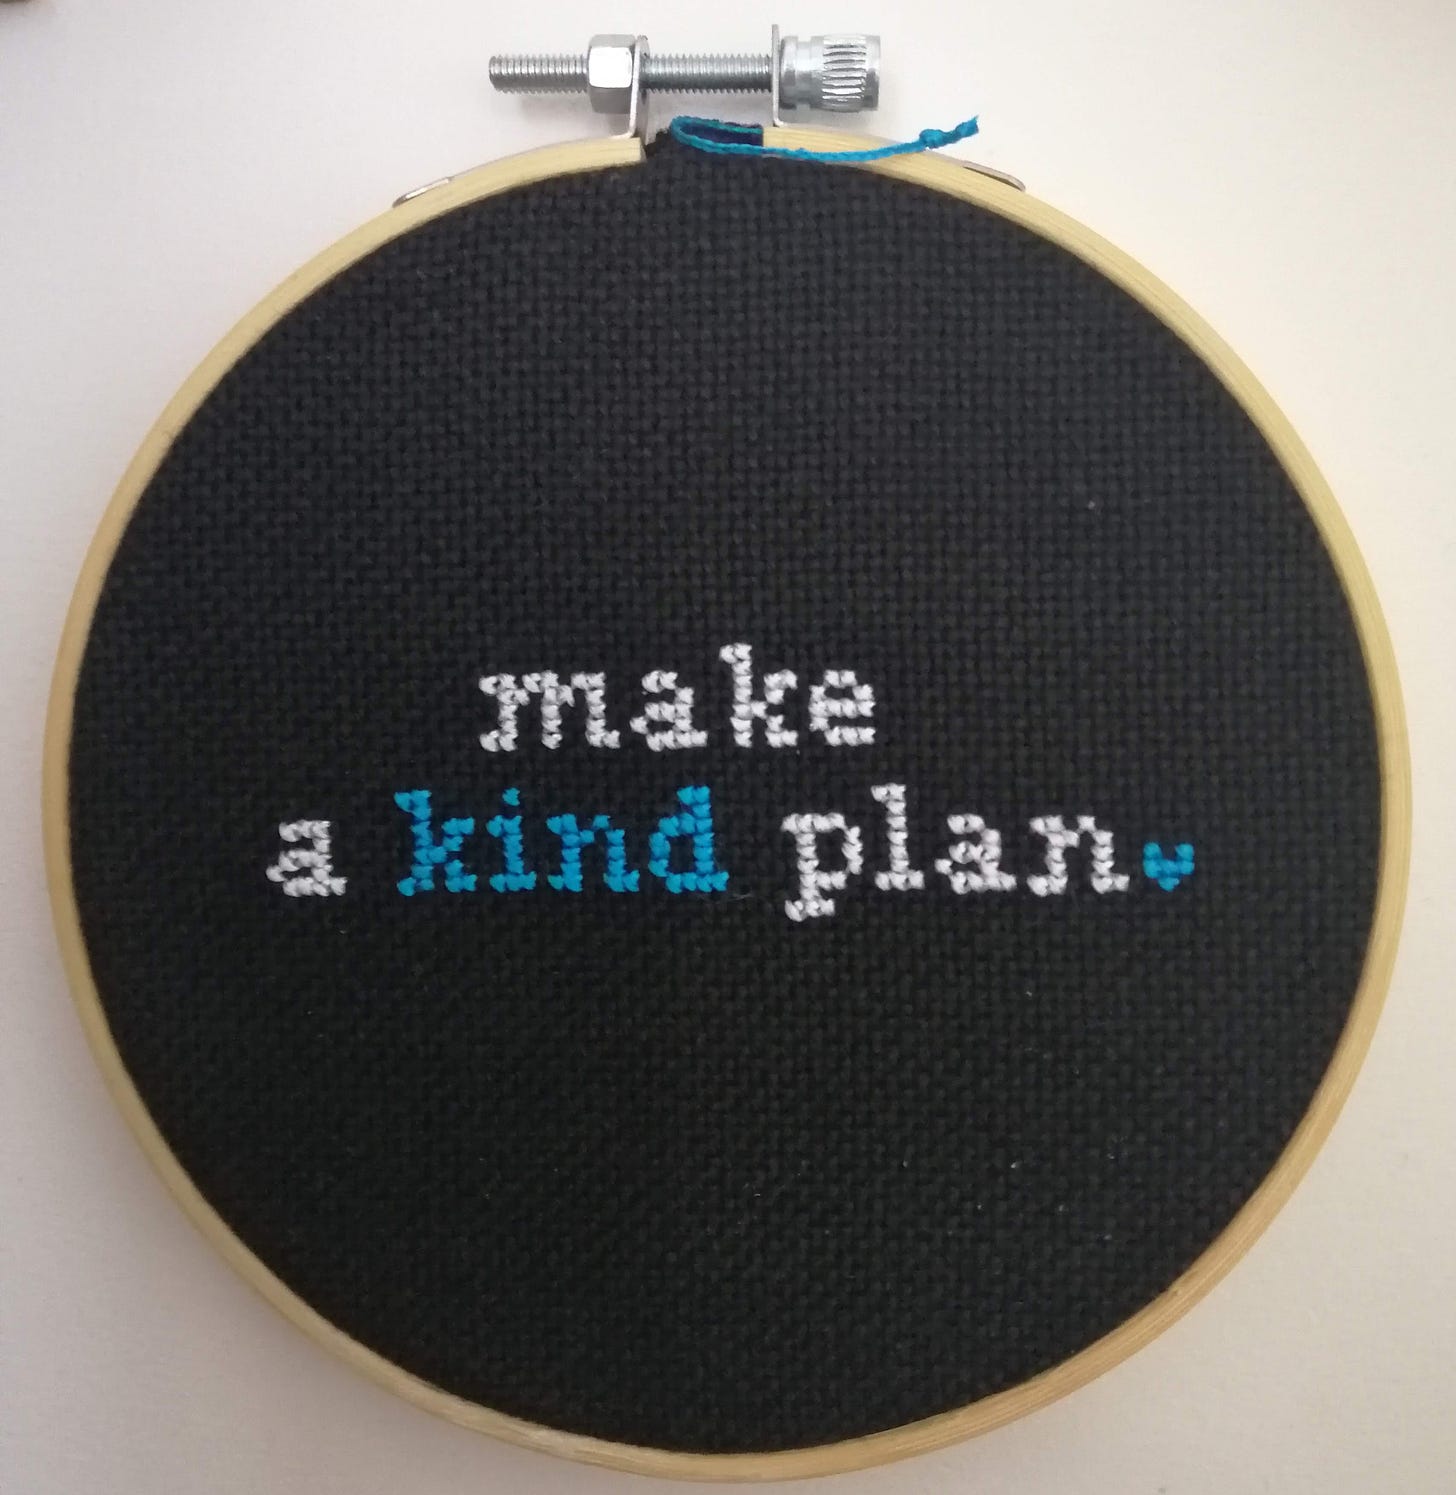 Cross stitch on black fabric framed in a hoop, the text reads "make a kind plan"